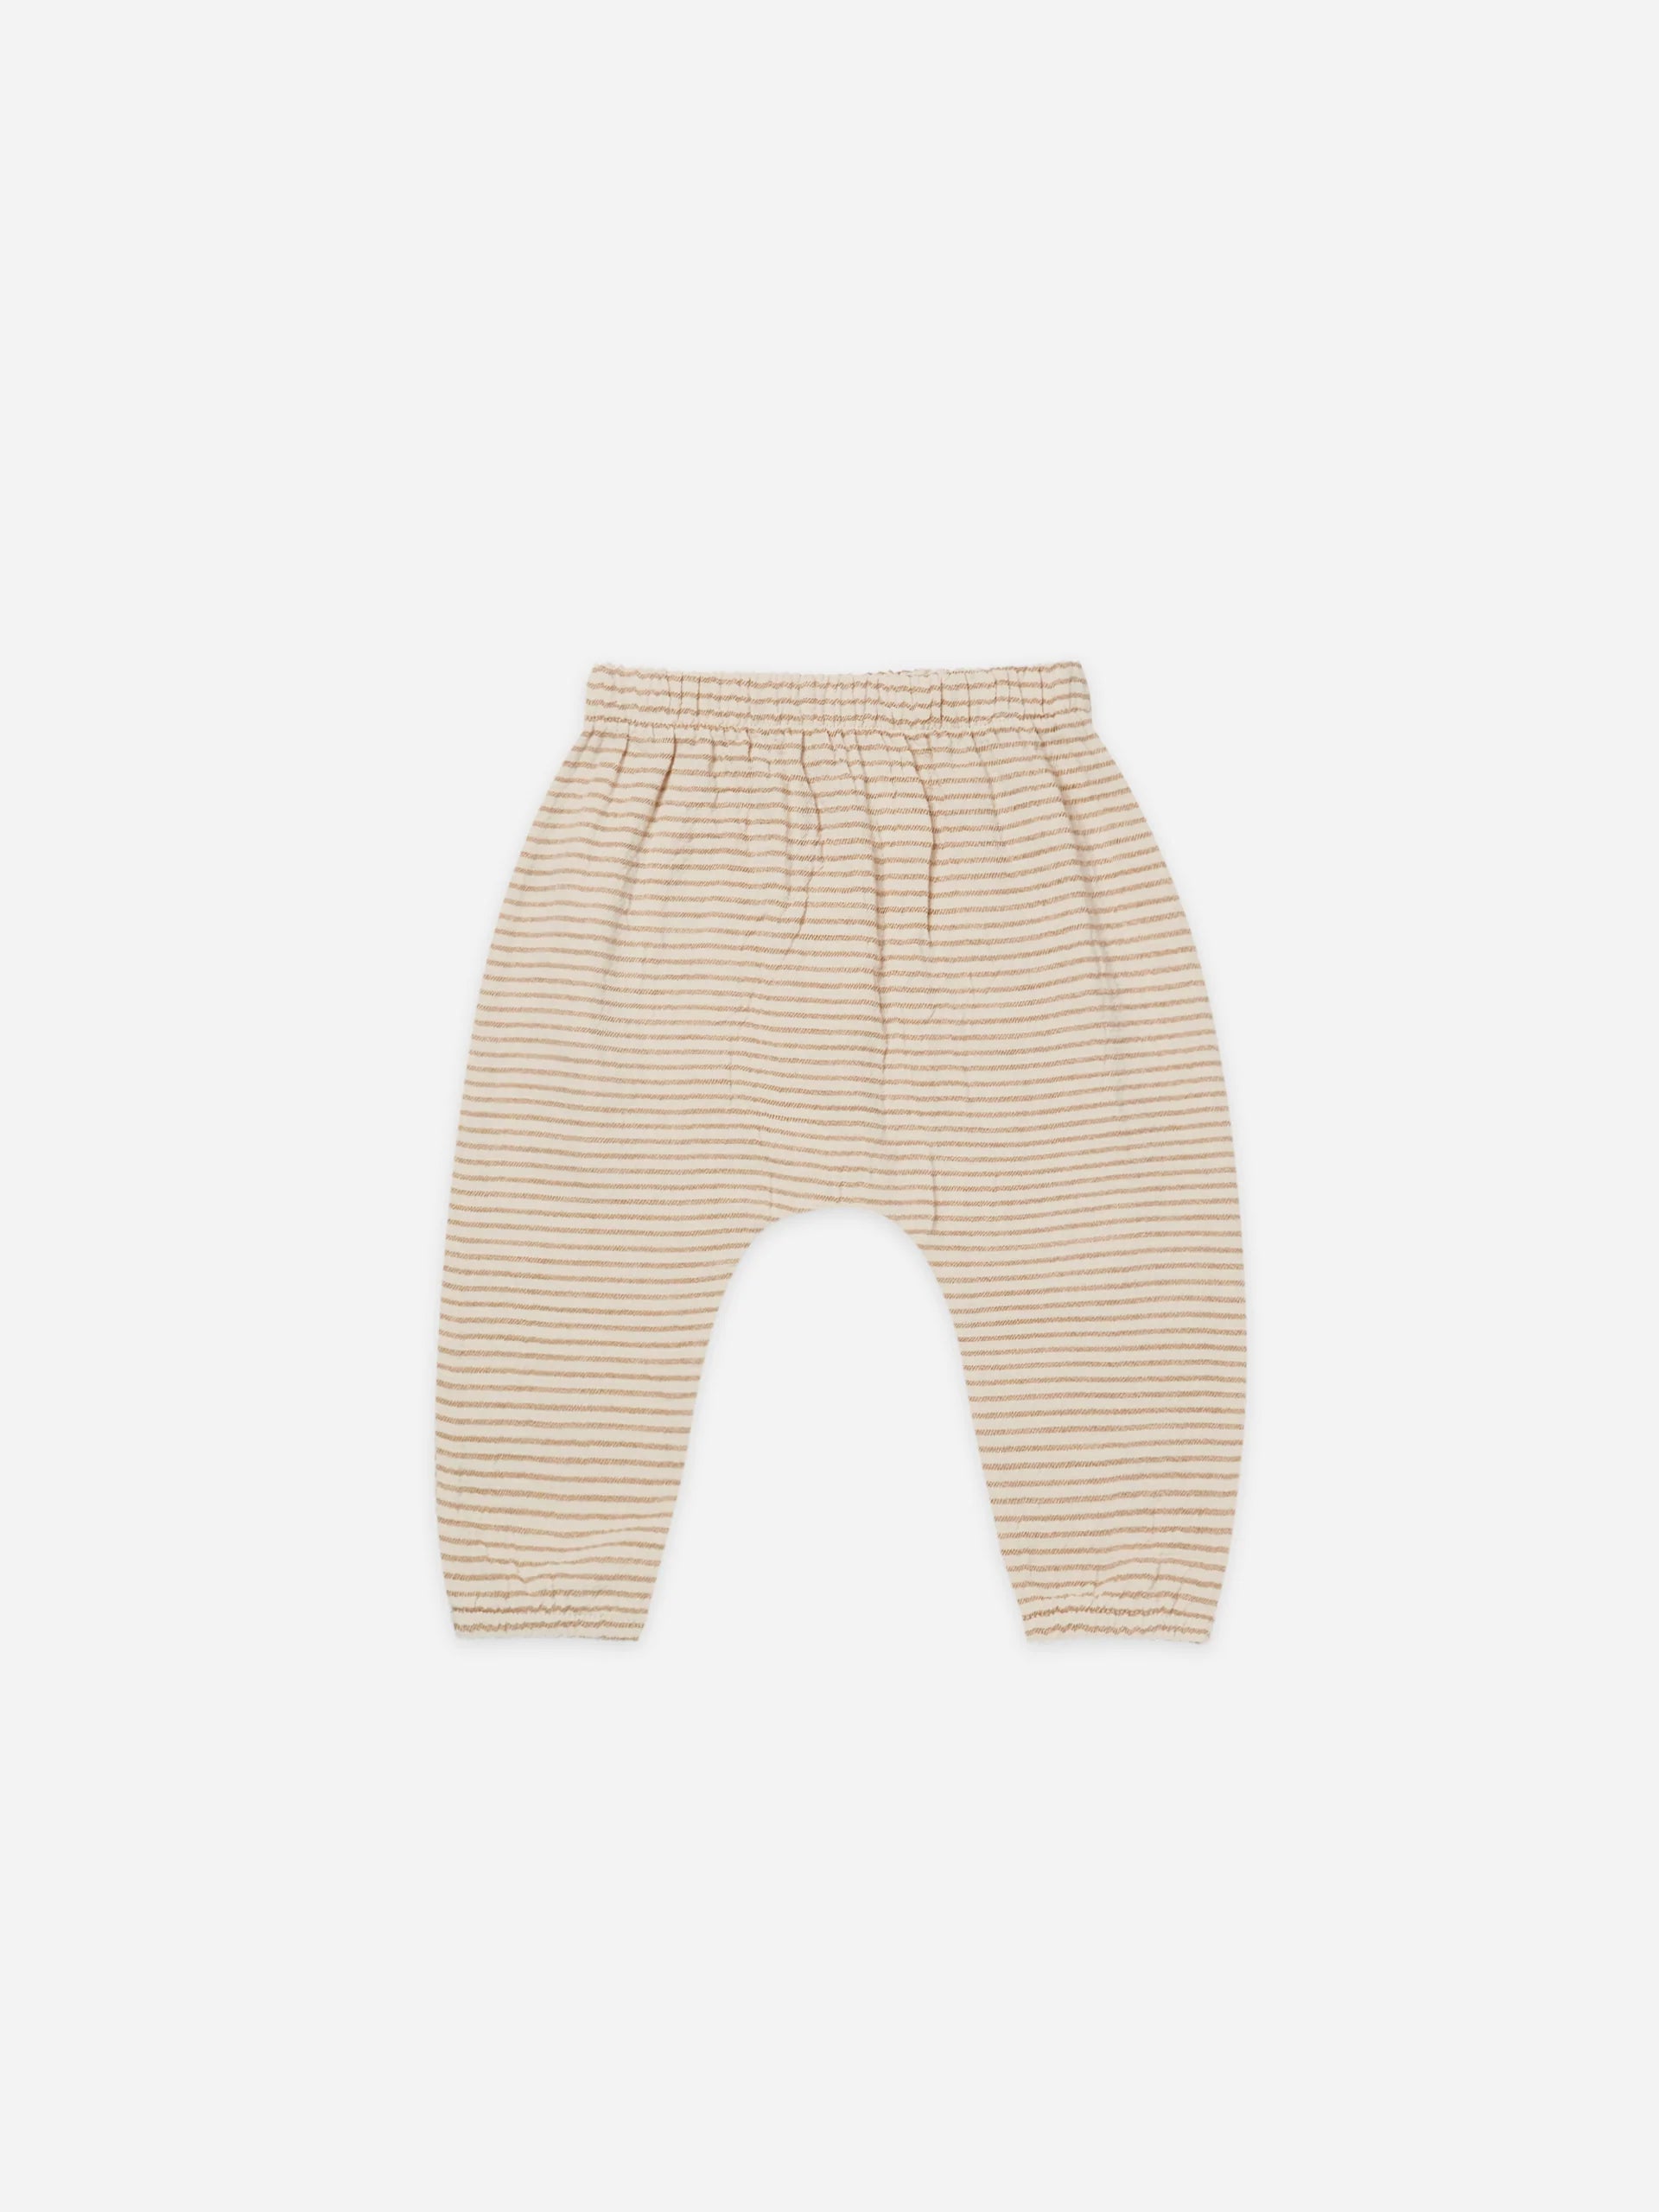 Quincy Mae Woven Pant - Ocre Stripe